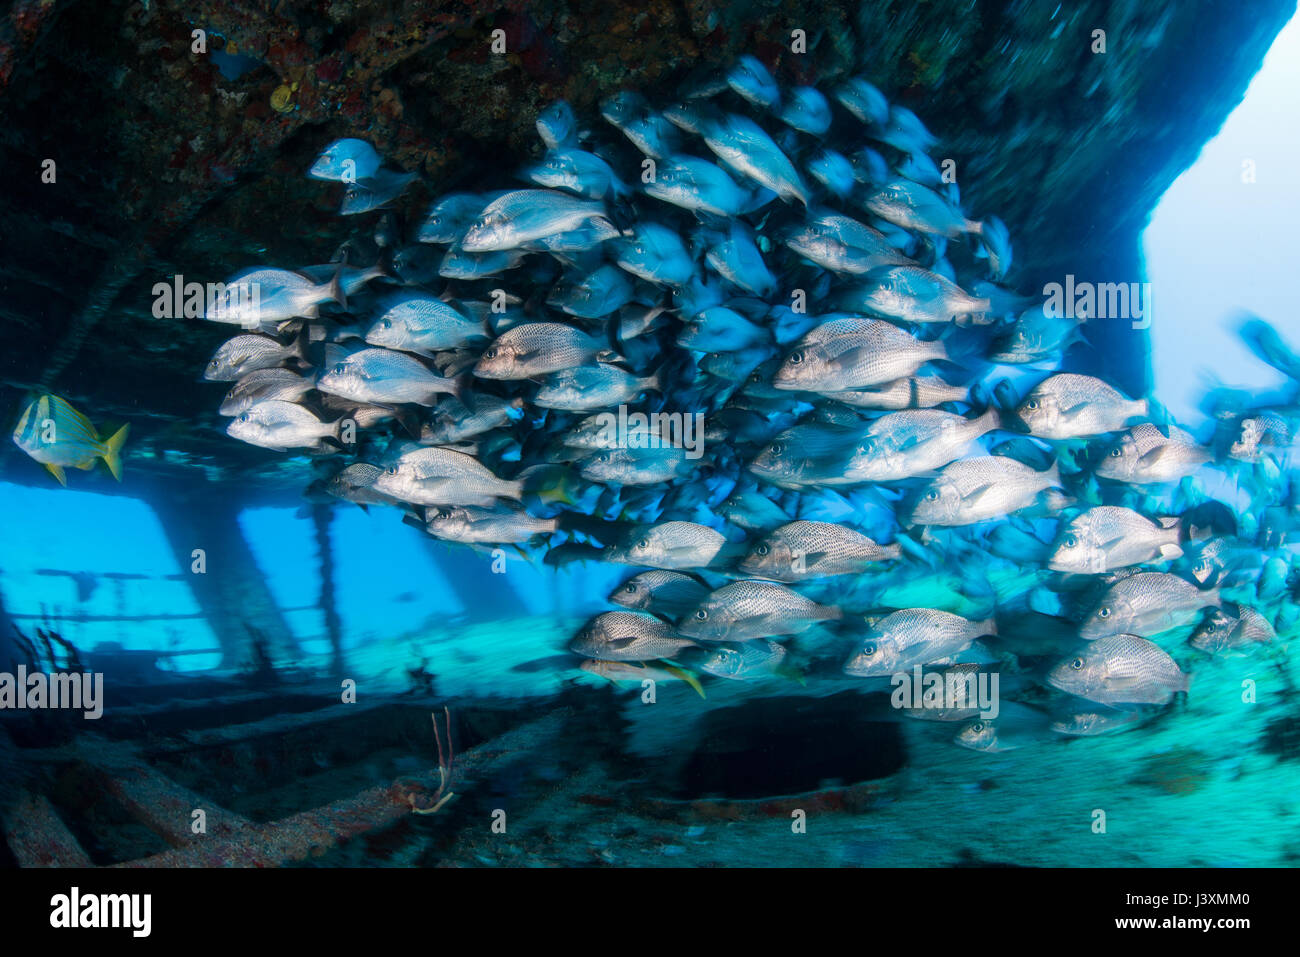 School of grunts by shipwreck, Cancun, Mexico Stock Photo